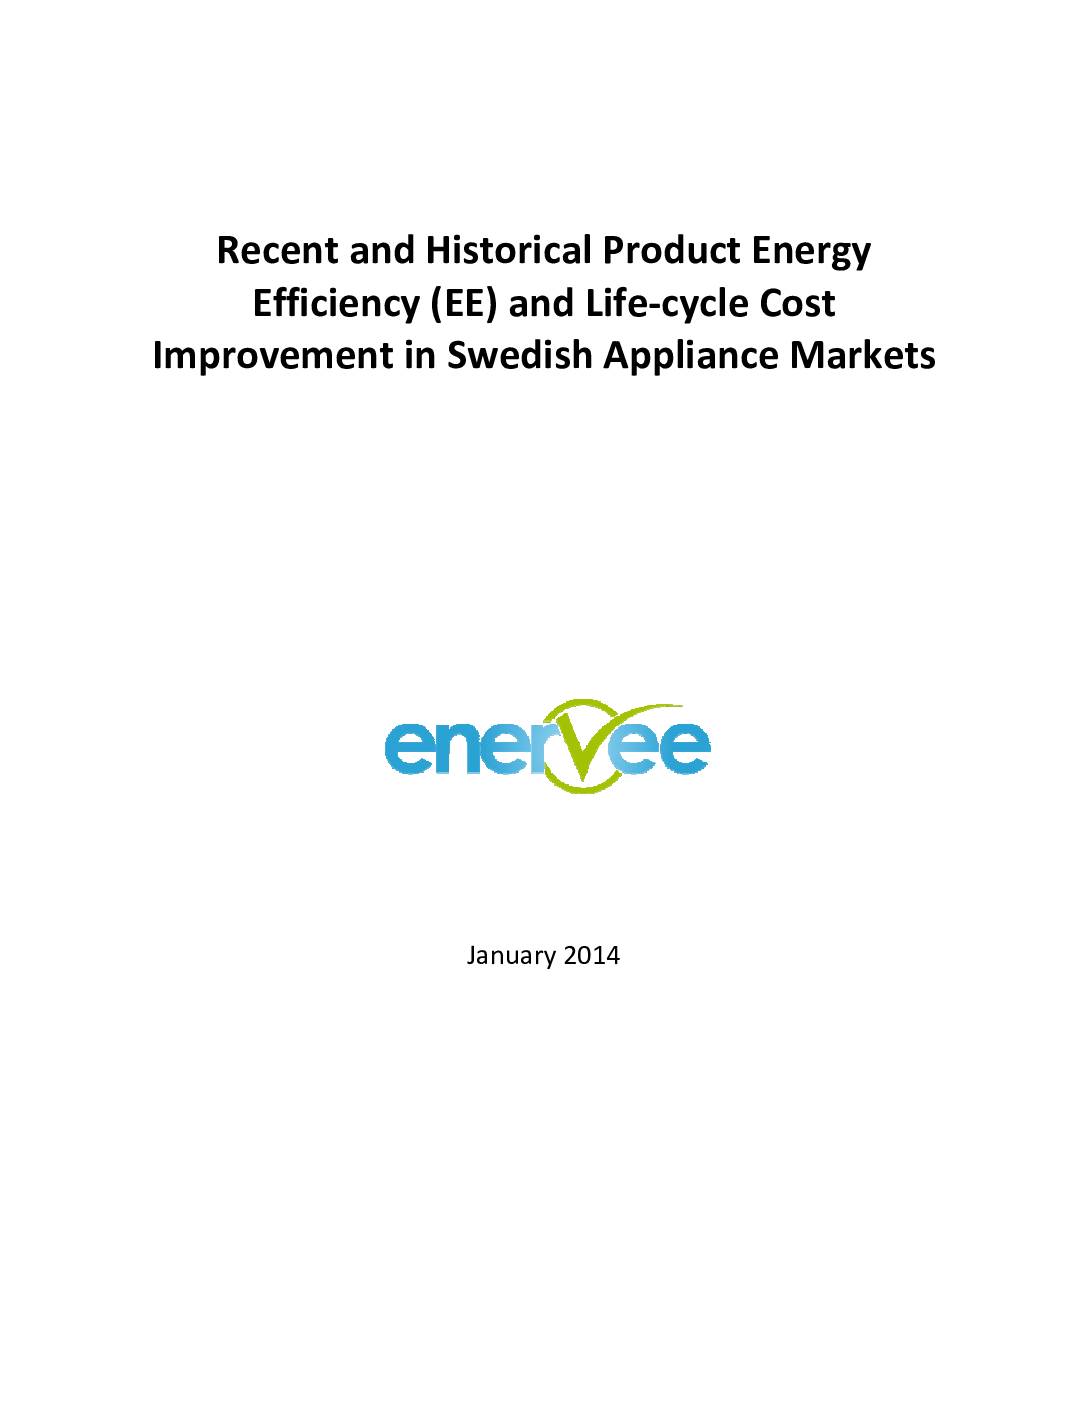 Recent and Historical Product Energy Efficiency (EE) and Life‐cycle Cost Improvement in Swedish Appliance Markets